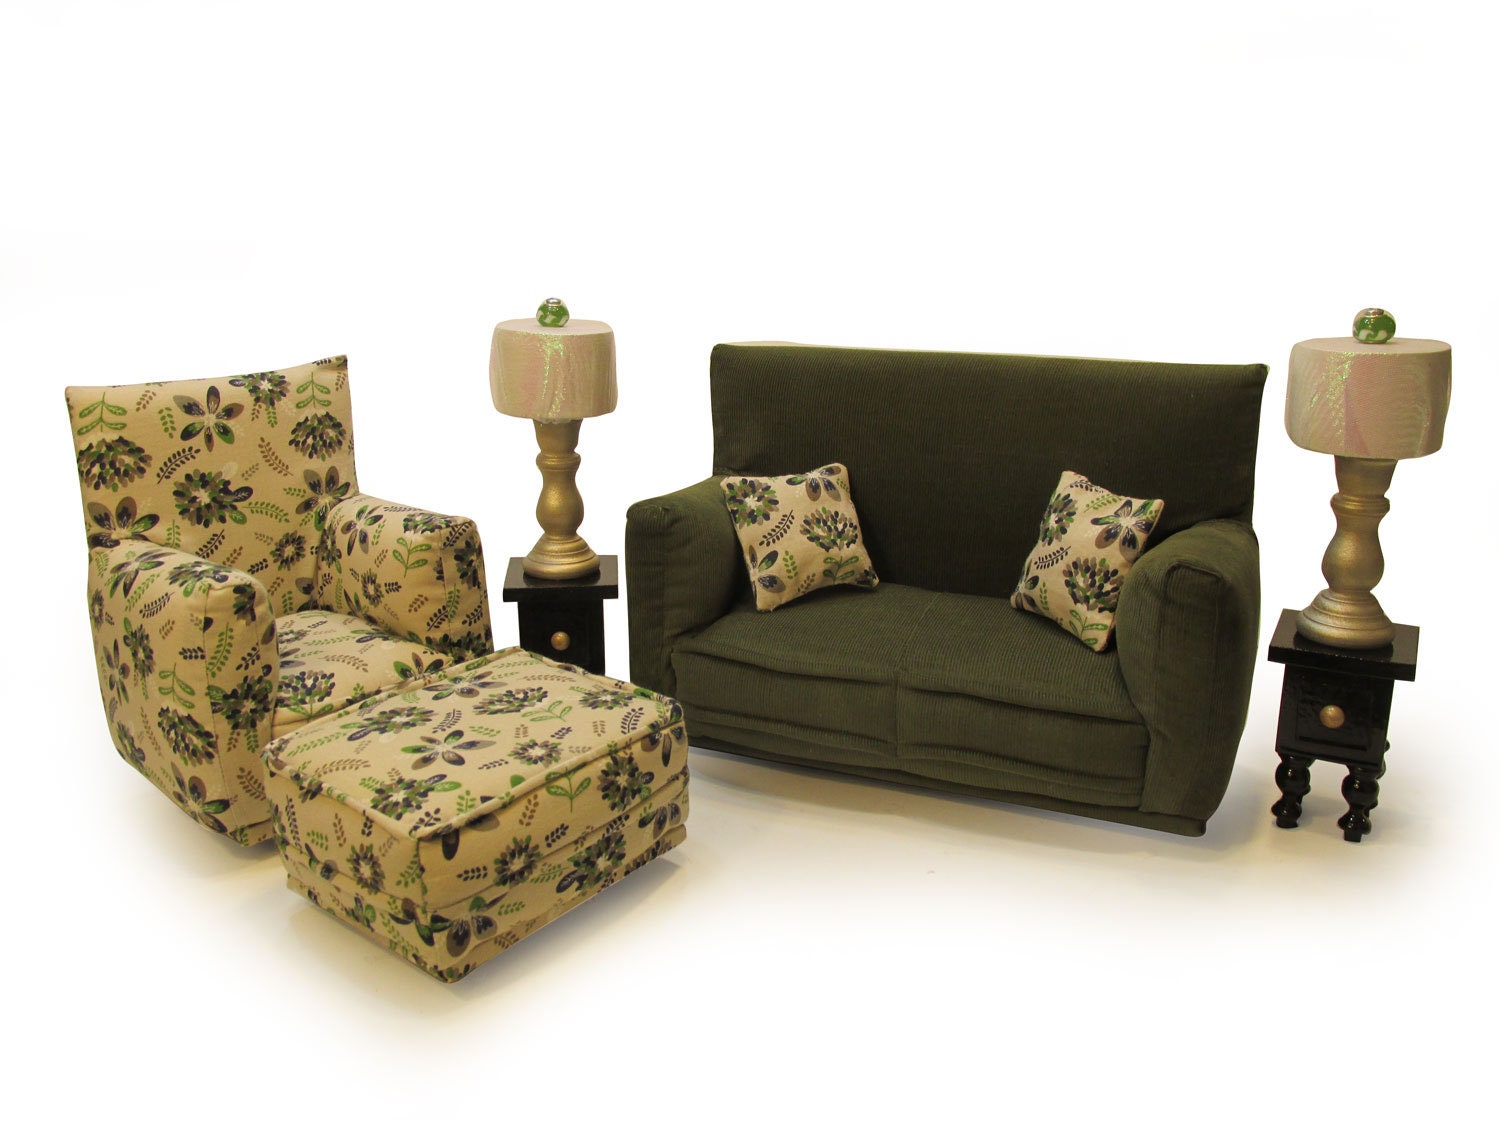 Barbie Doll Living Room Furniture 9 PC Play Set 16 Scale Olive And Beige Green Flower Print Works W Blythe Any 11 Inch Fashion Doll